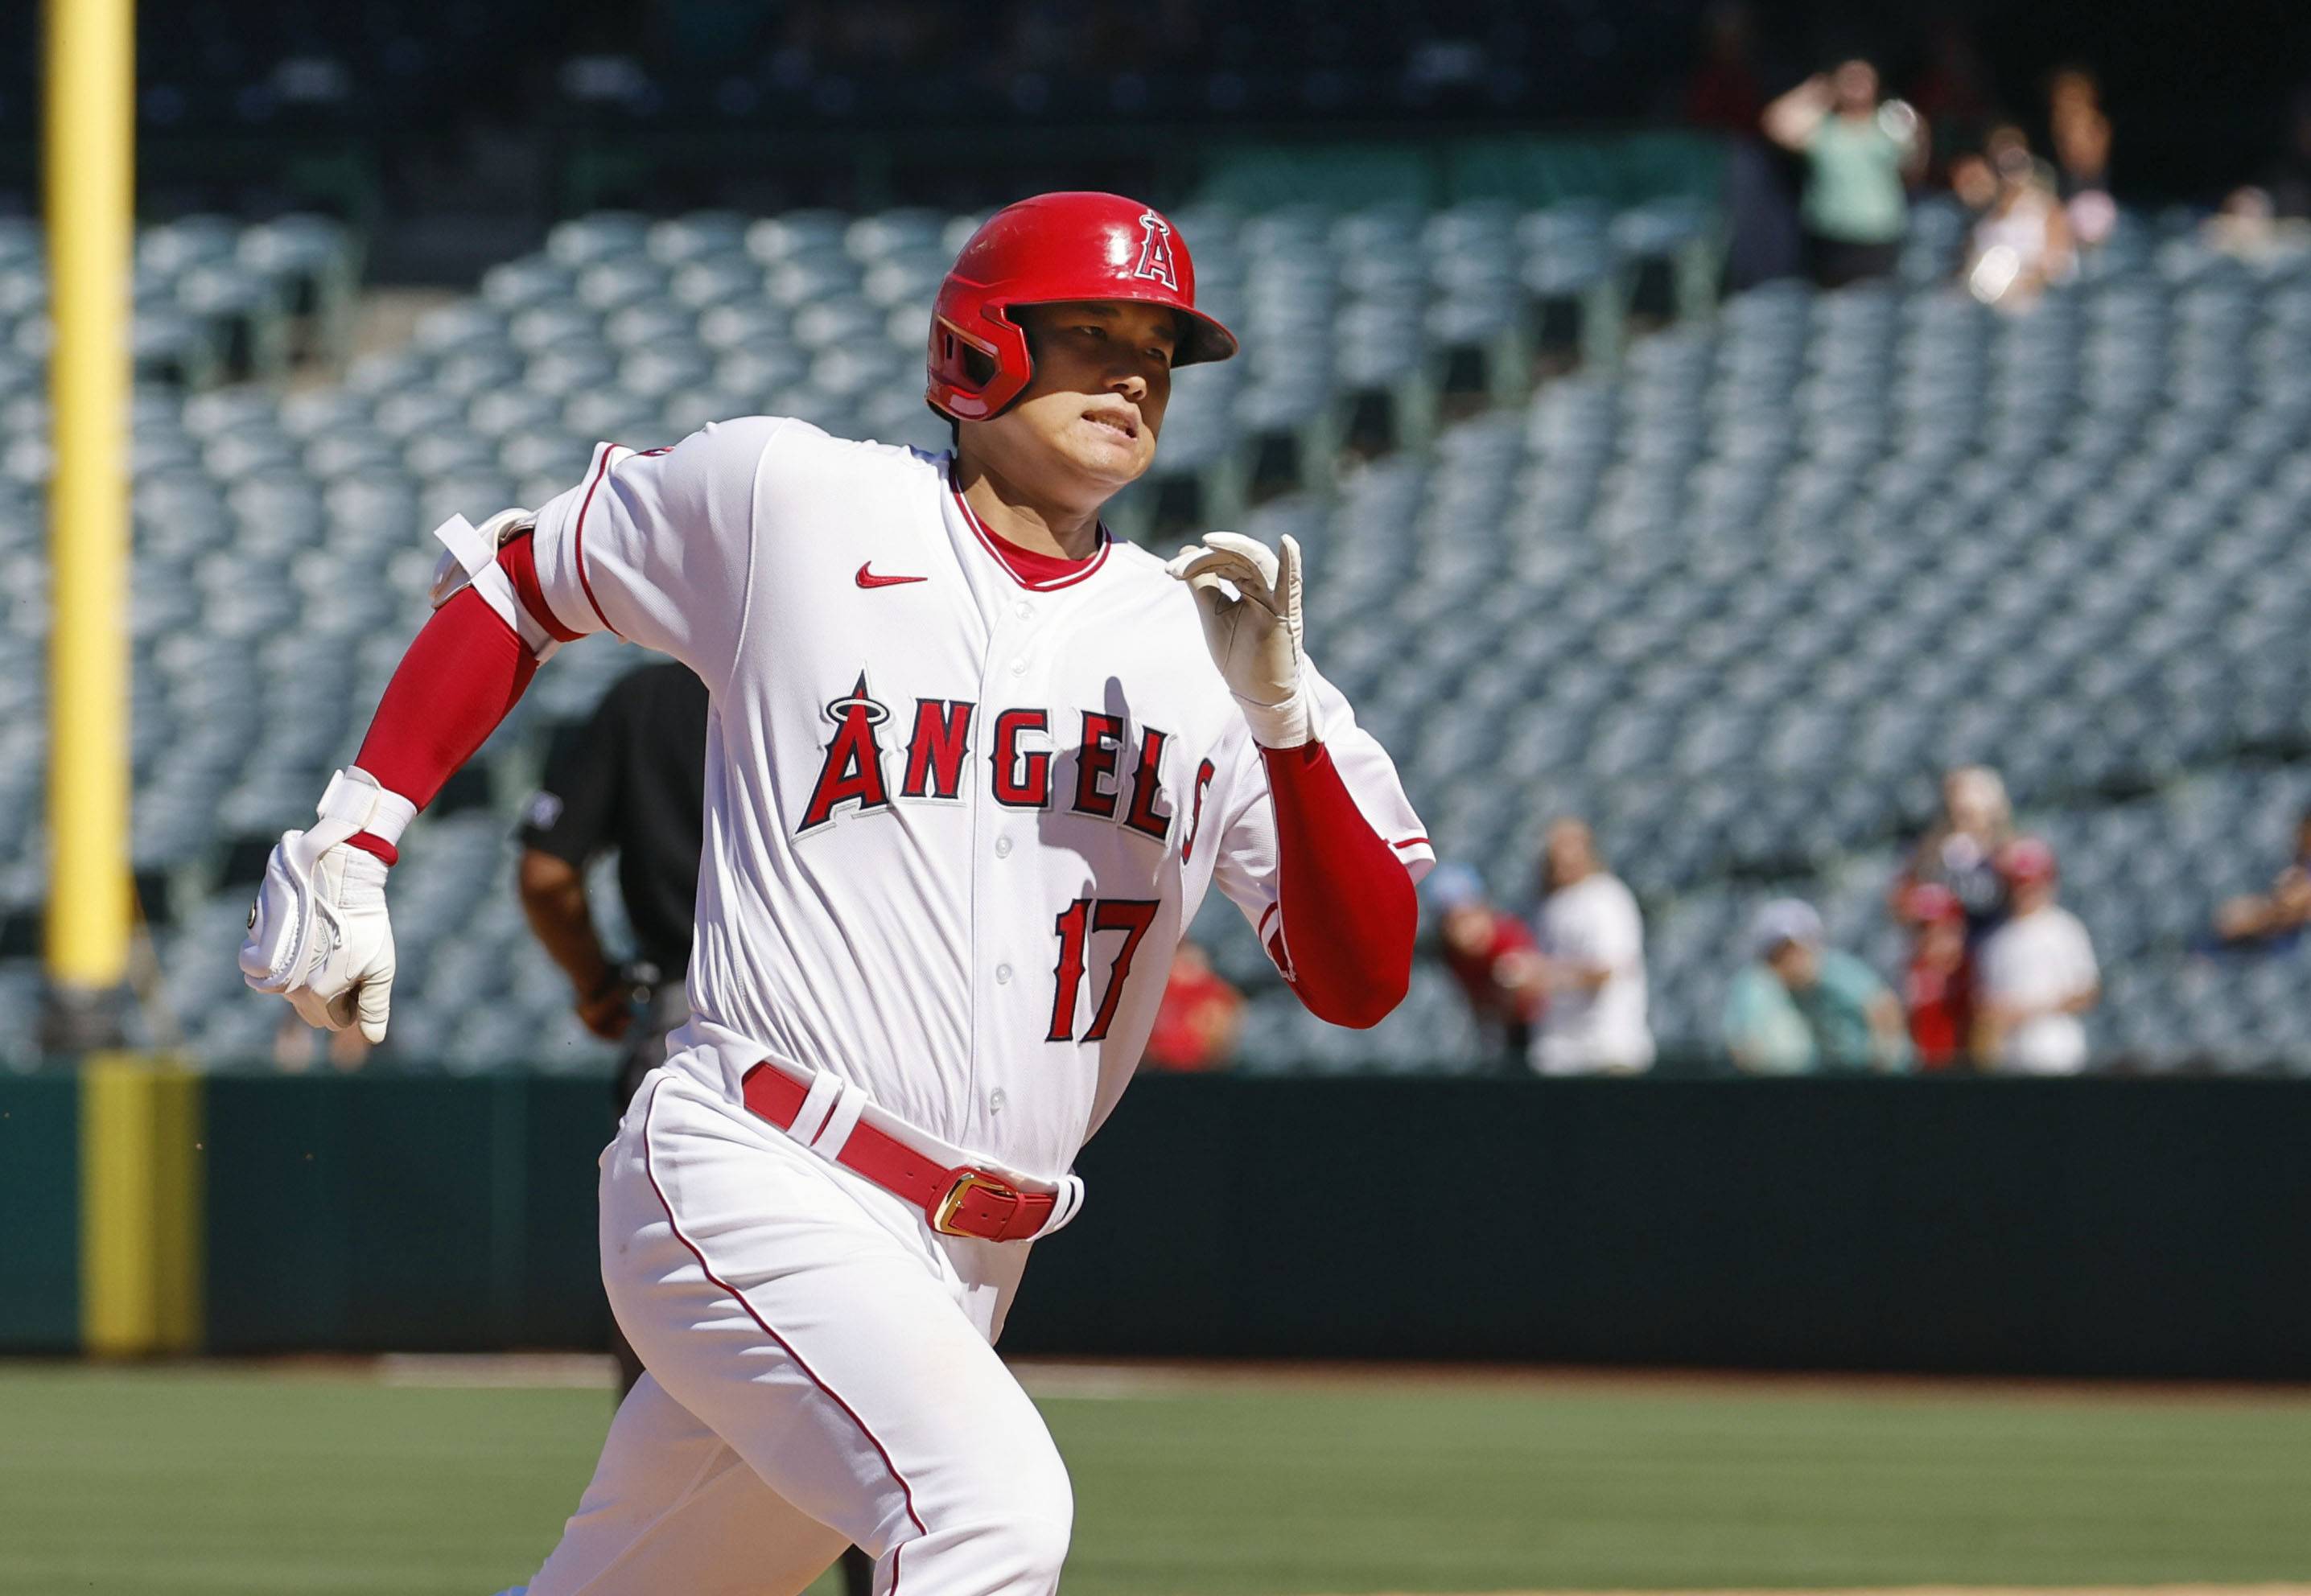 Shohei Ohtani hits an RBI triple against the Mariners during the seventh inning in Anaheim, California, on Wednesday. | KYODO